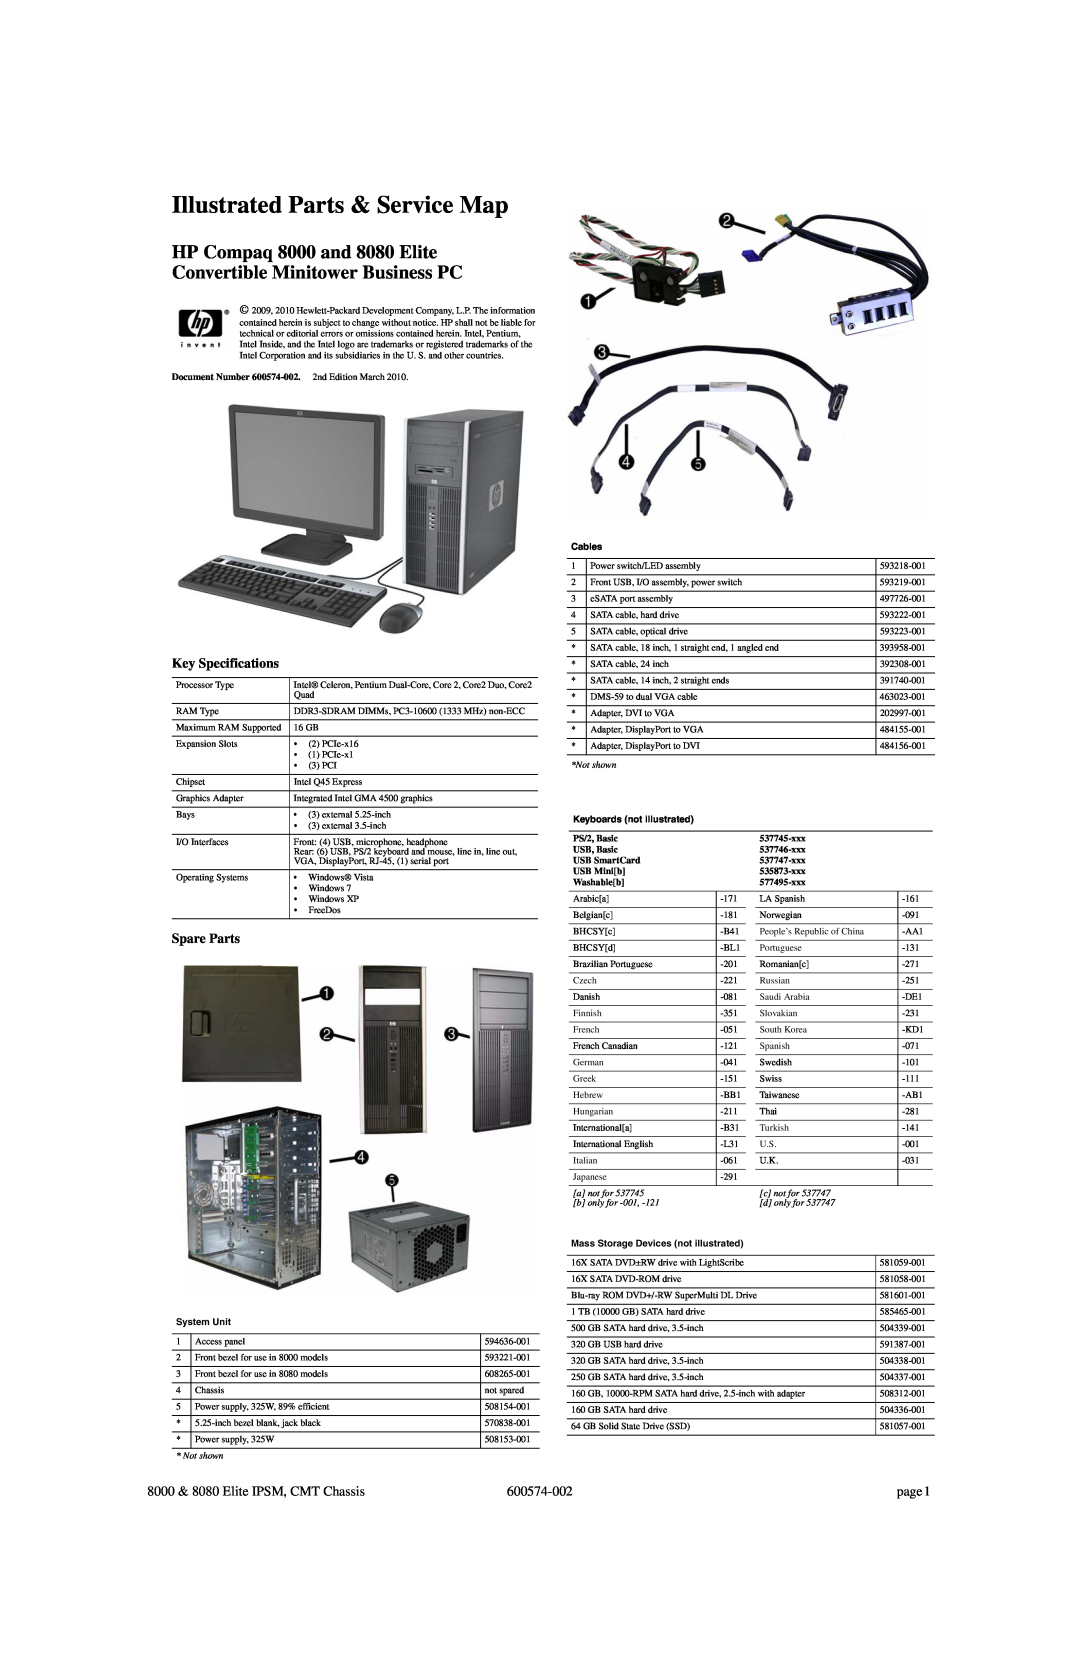 Compaq specifications Key Specifications, Spare Parts, 8000 & 8080 Elite IPSM, CMT Chassis, 600574-002, page, Not shown 